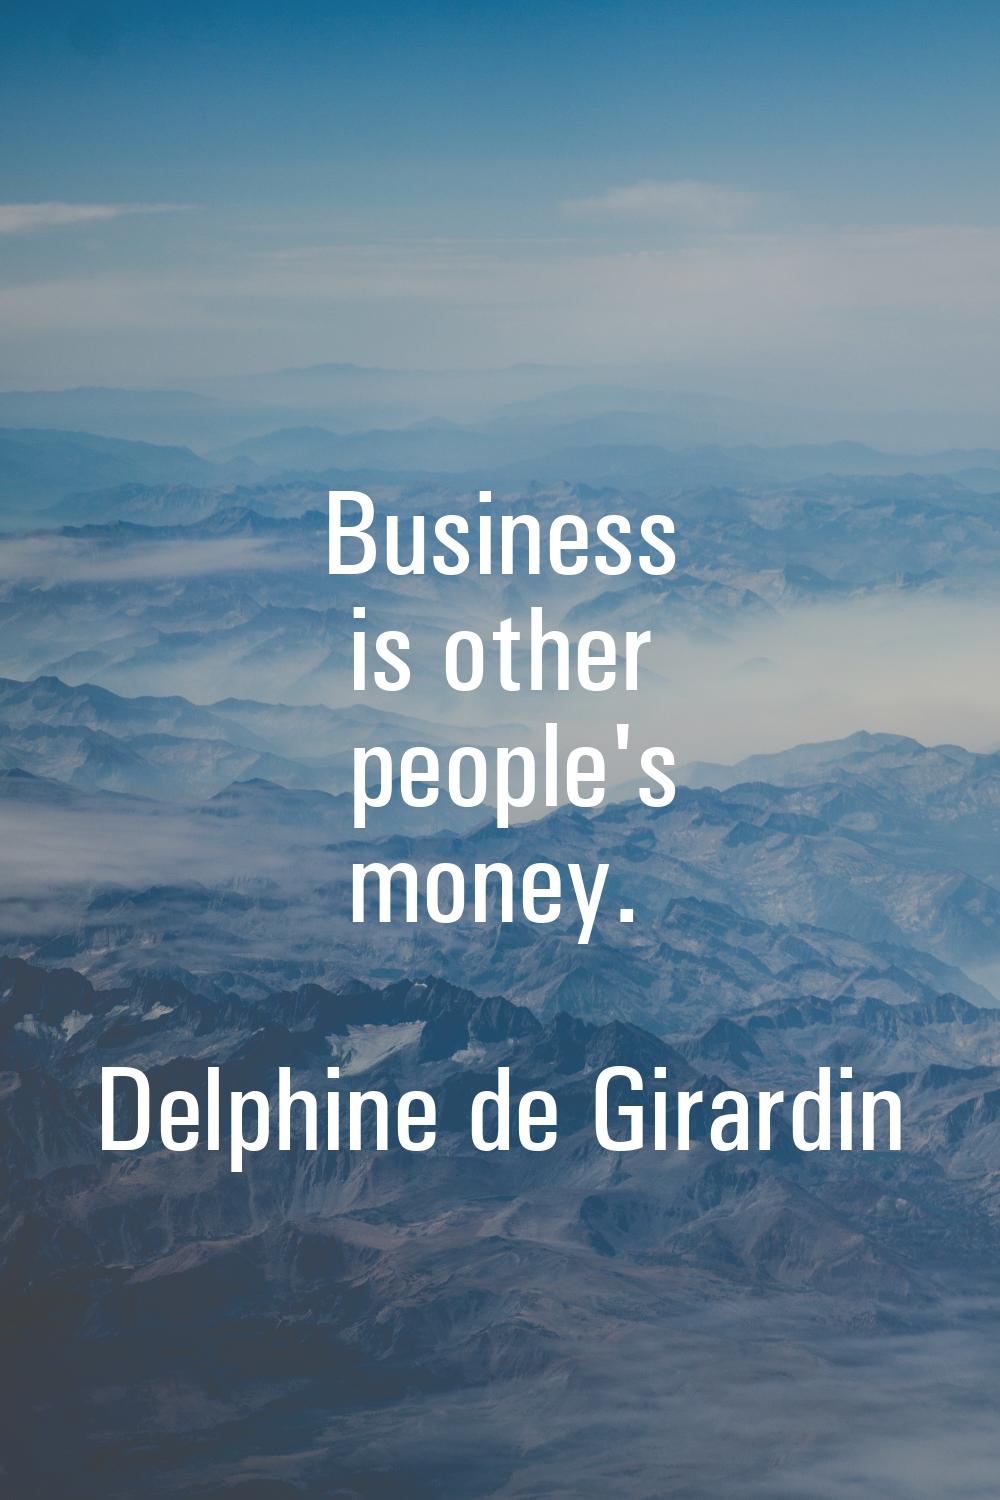 Business is other people's money.